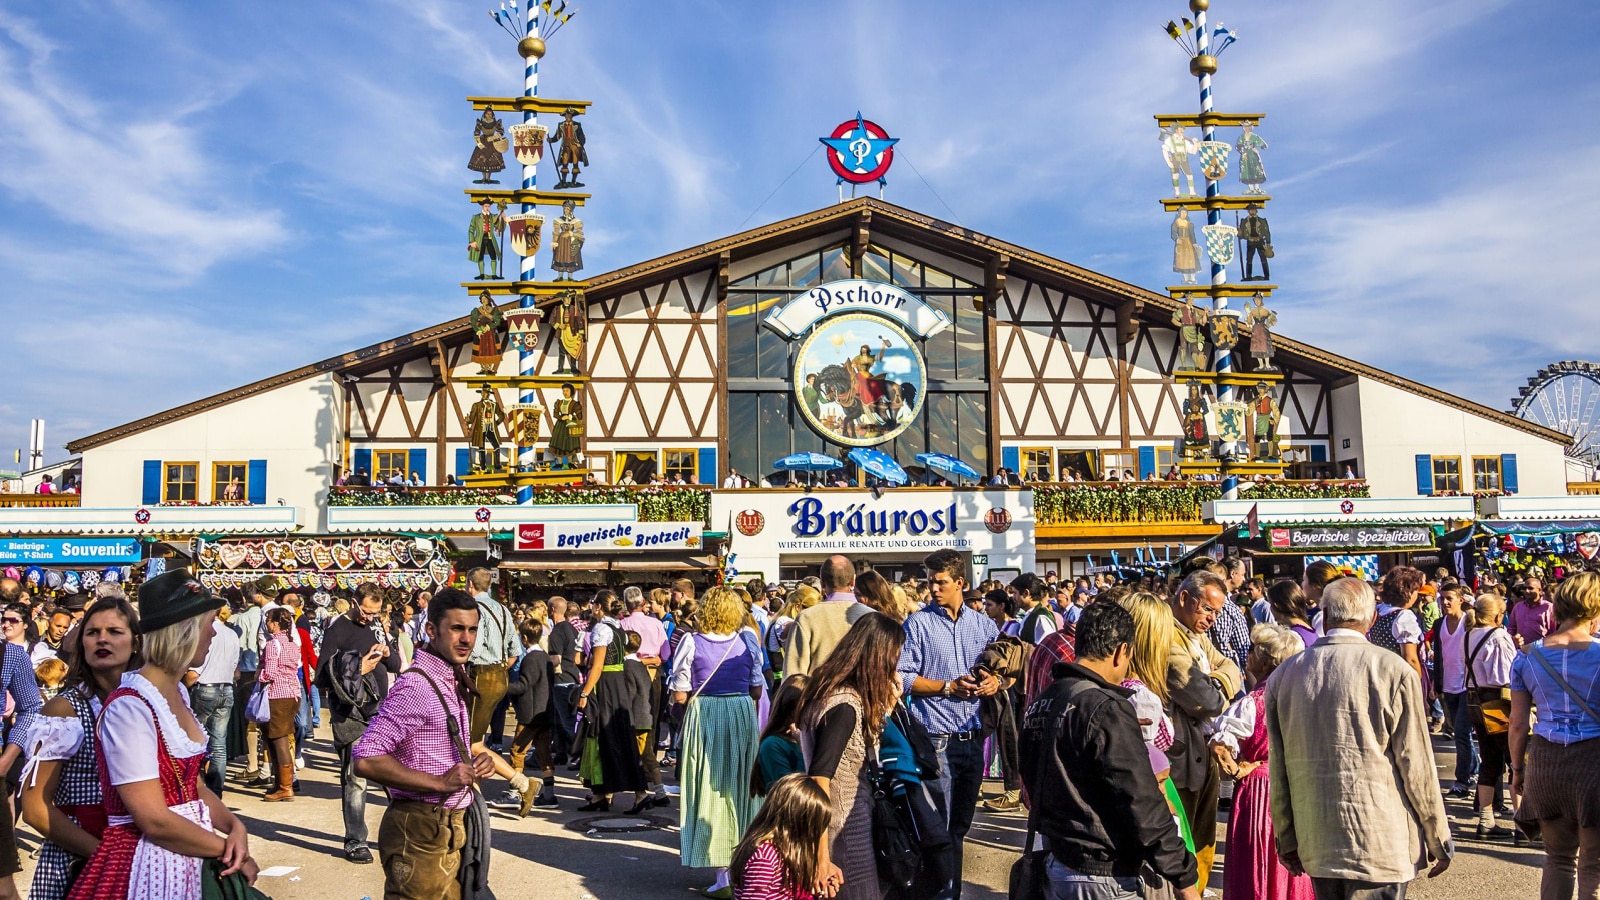 MUNICH, GERMANY - SEPTEMBER 23, 2012: Oktoberfest, Munich: One of the big beer tents. In the foreground, people are walking along, partly dressed in traditional costumes.